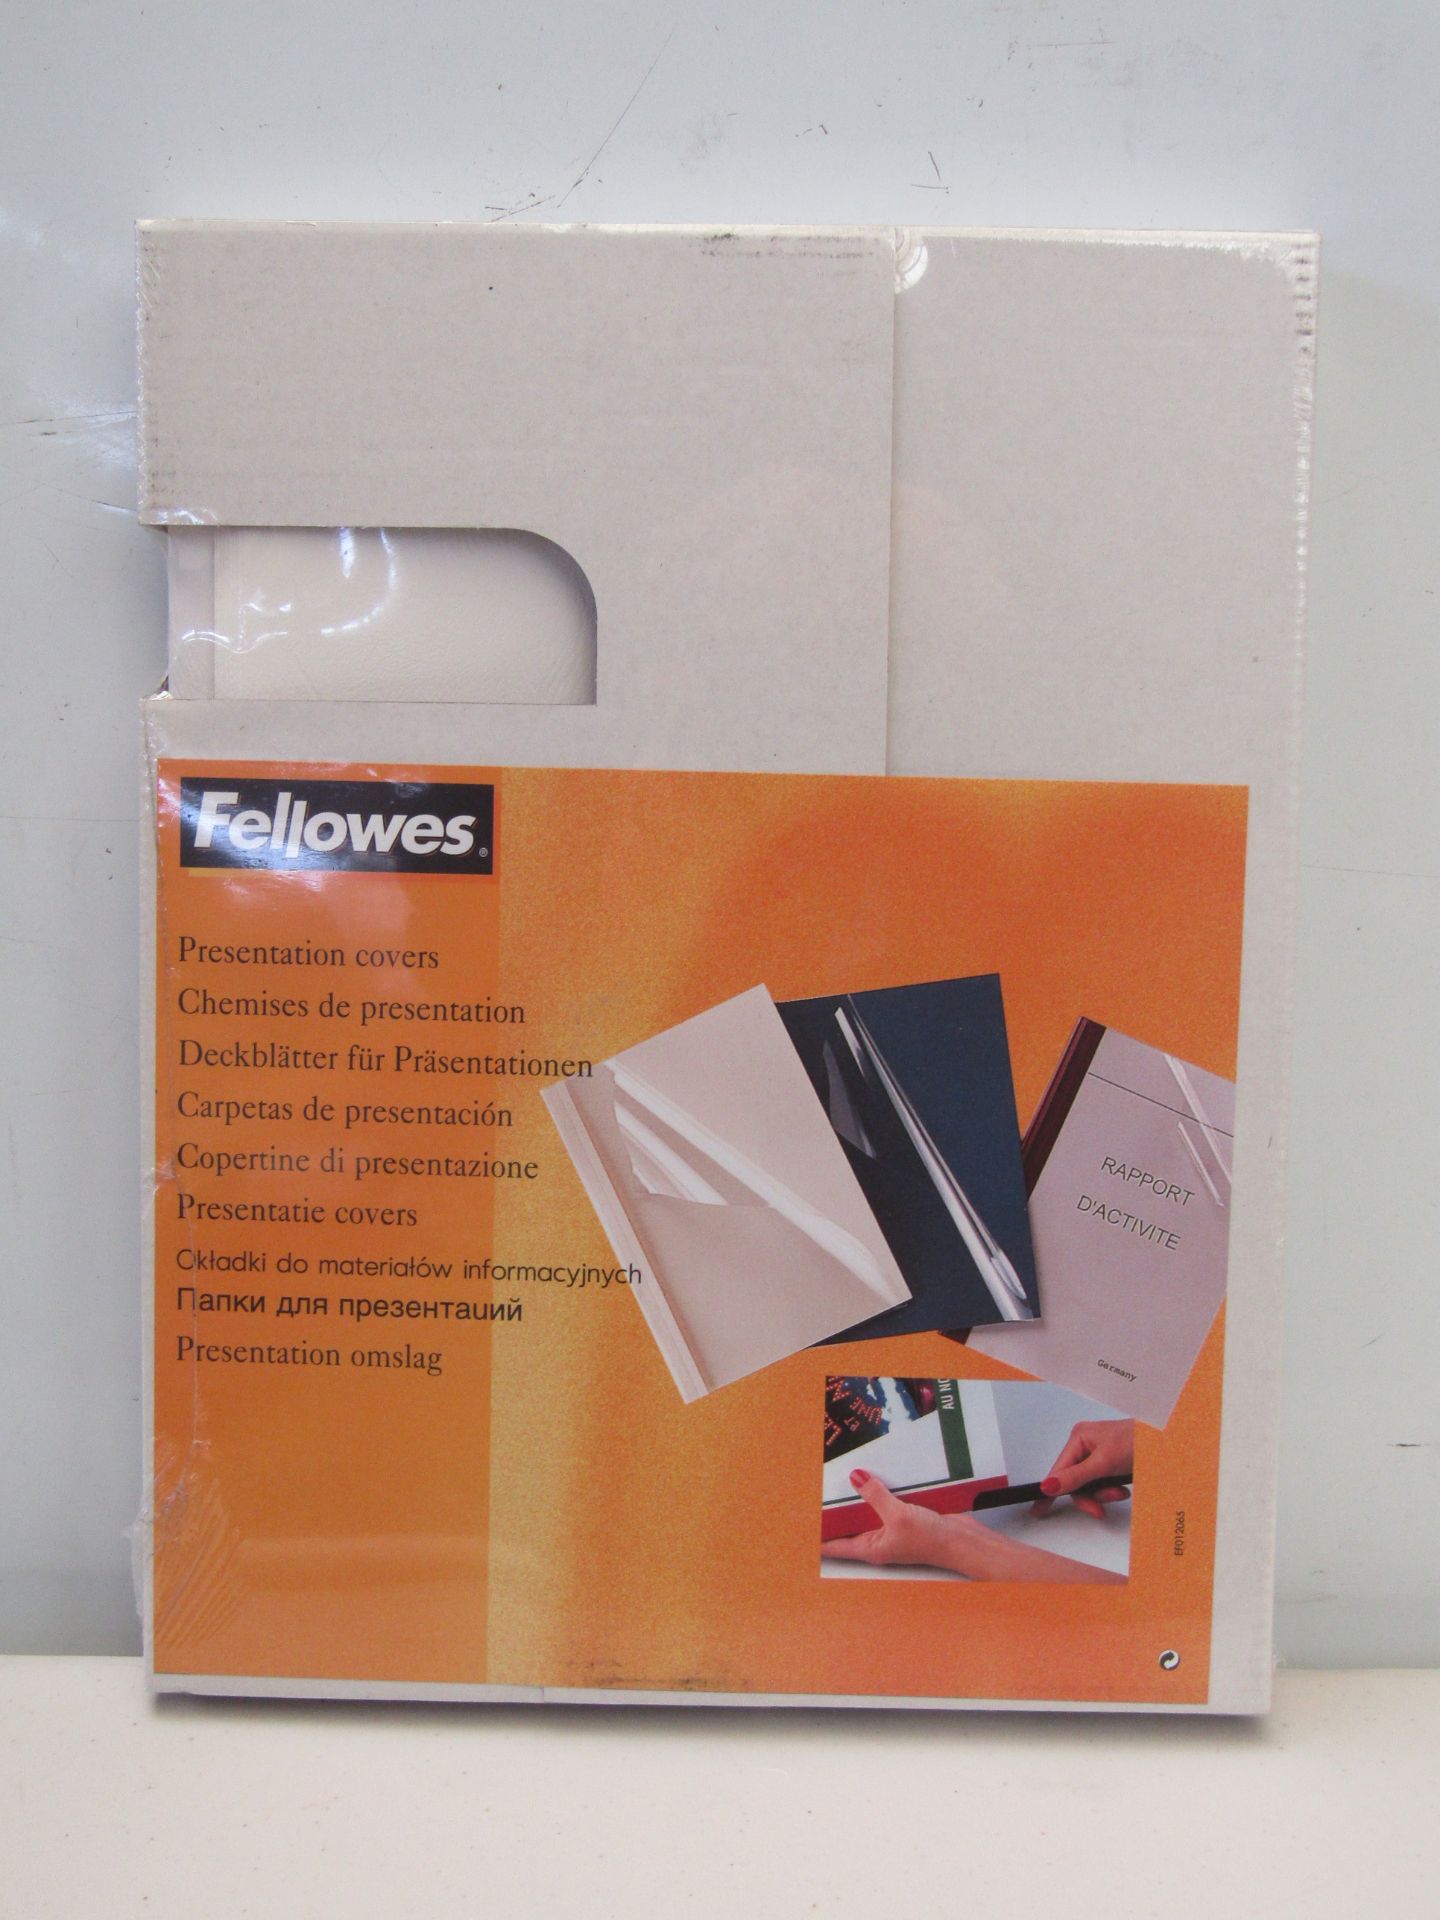 5x packs of Fellowes presentation covers, each pack contains 20x 9-12mm covers.